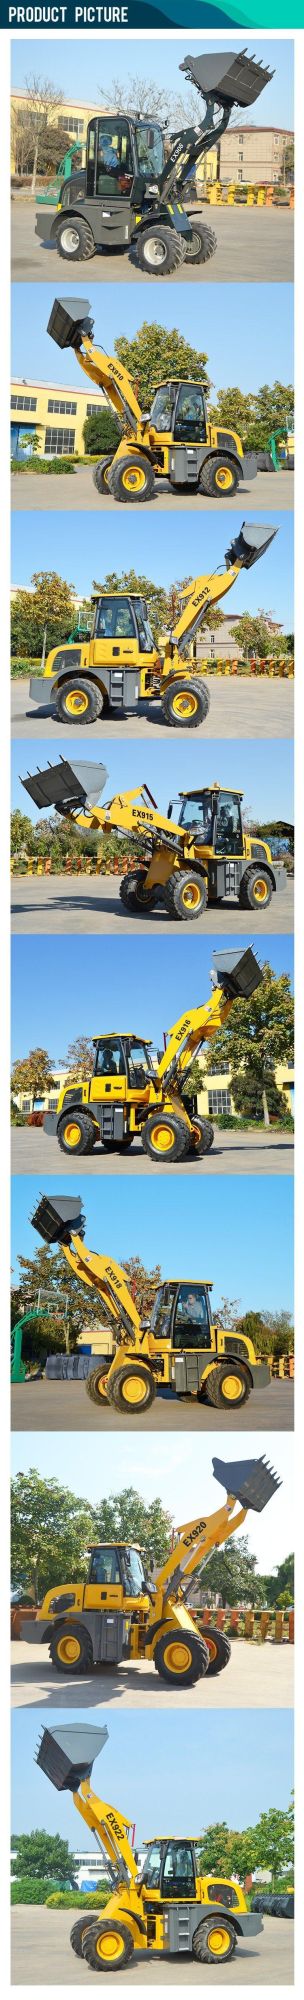 Hydraulic Small Huaya Loaders for Sale Articulated Mini Wheel Loader